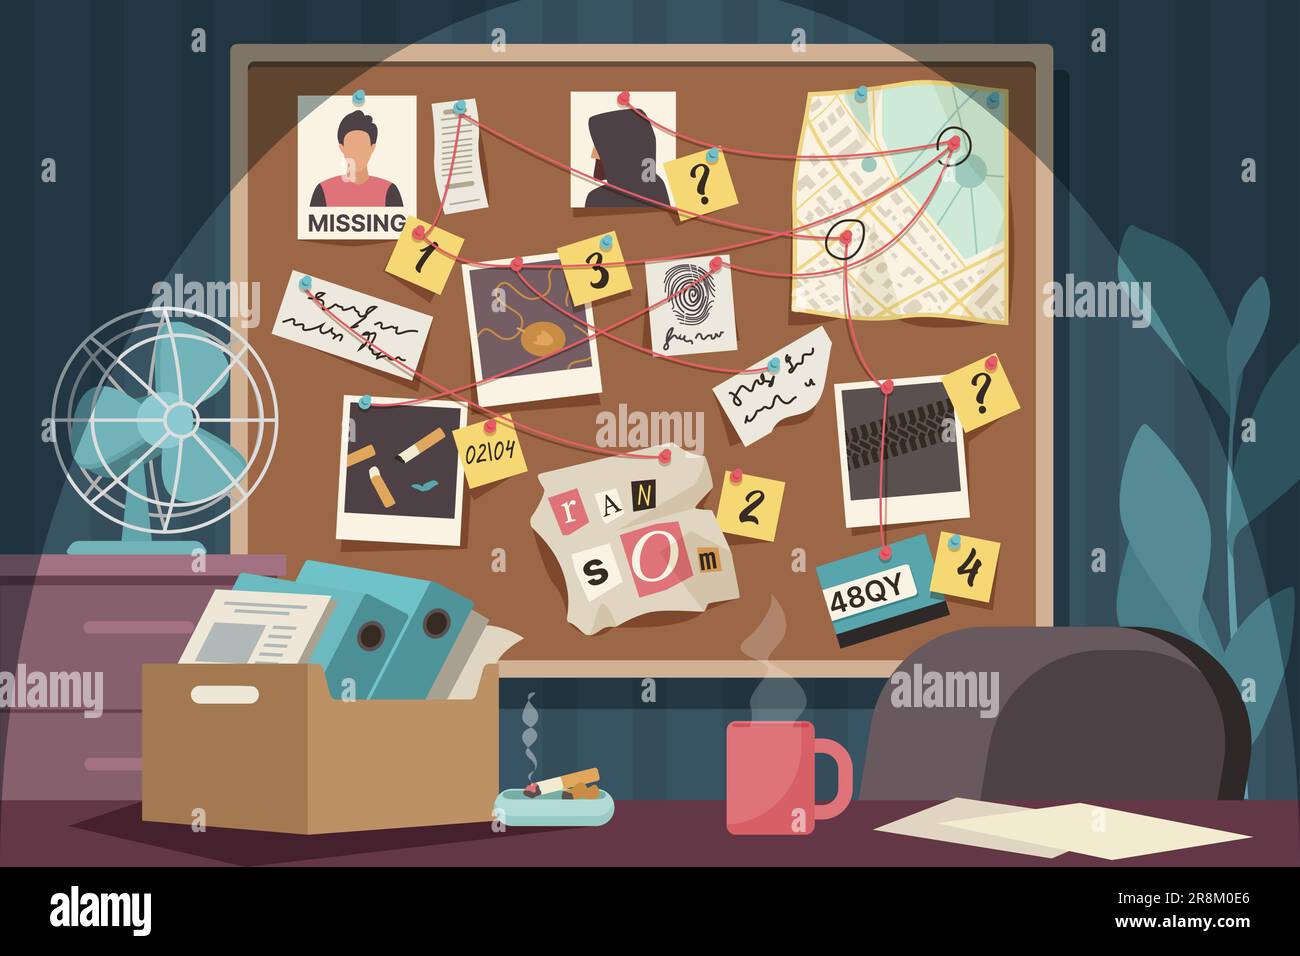 Evidence board in police office vector illustration. Cartoon interior of detectives room with desk, board on wall with elements of investigation connected by red thread to investigate murder case Stock Vector